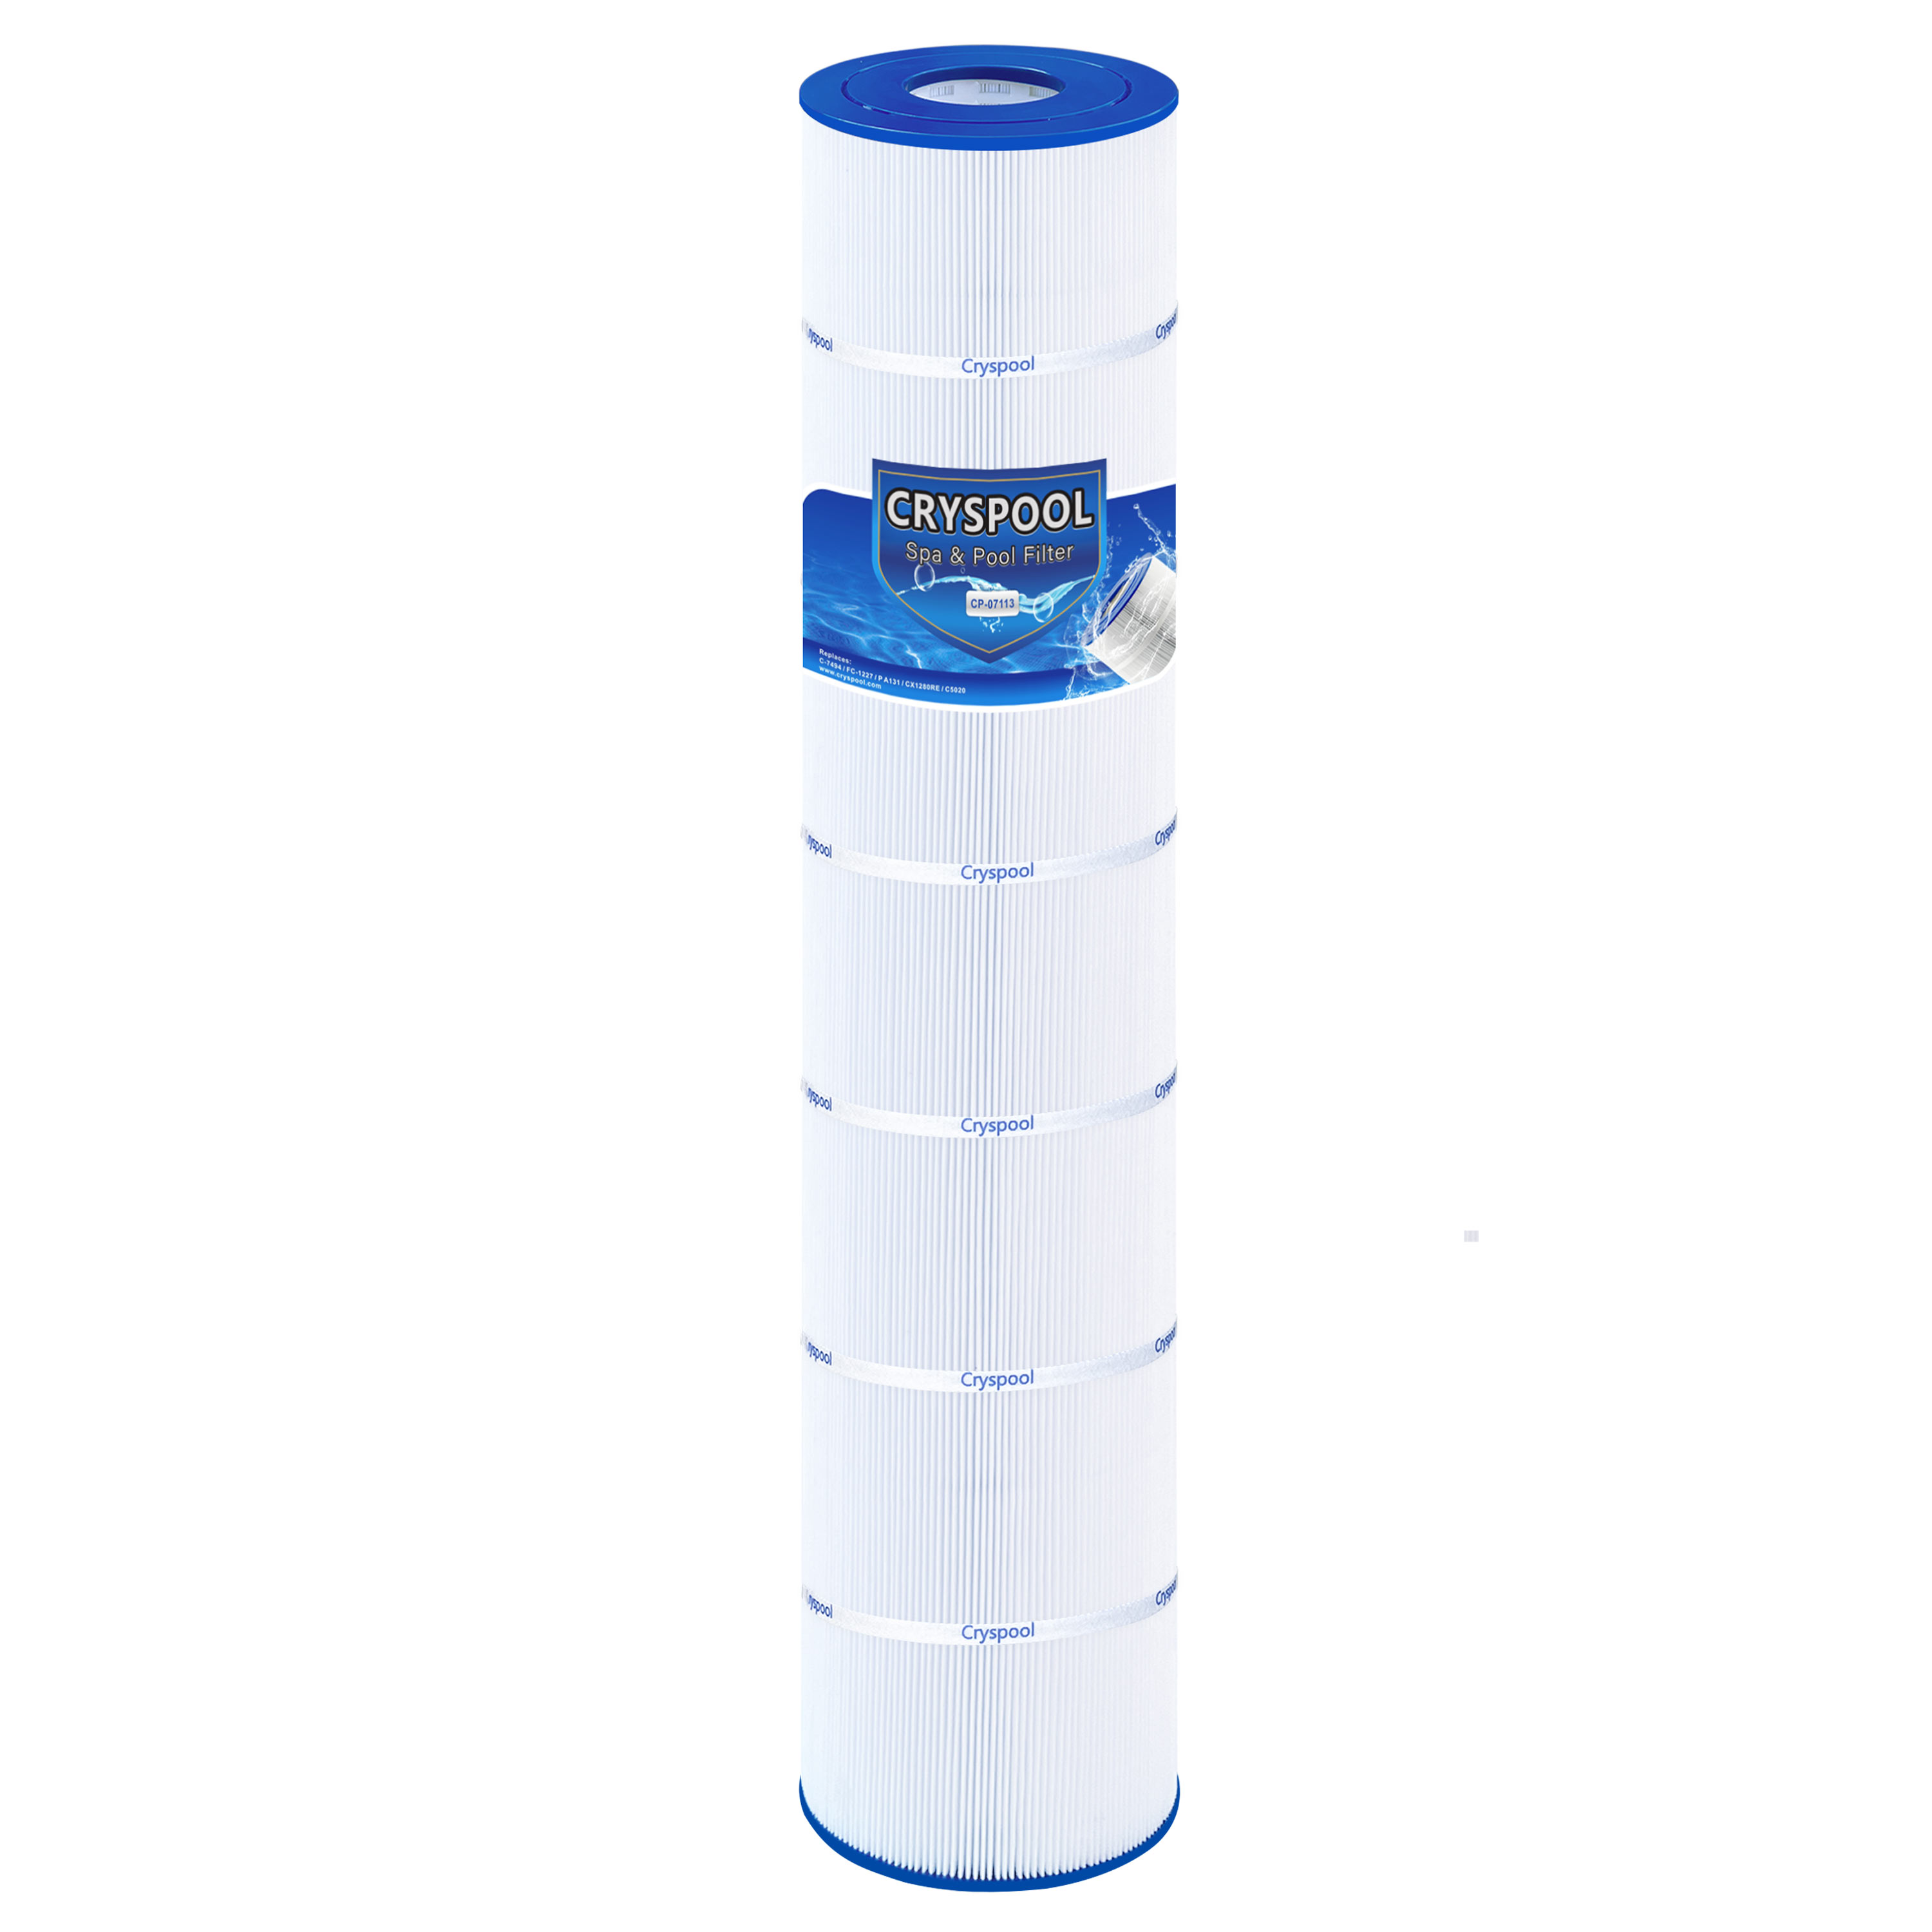 New Arrival China A&C Pool Filters - Cryspool Pool Filter Compatible with Hayward CX1280RE, SwimClear C5020, PA131, Unicel C-7494, Filbur FC-1227 – Cryspool